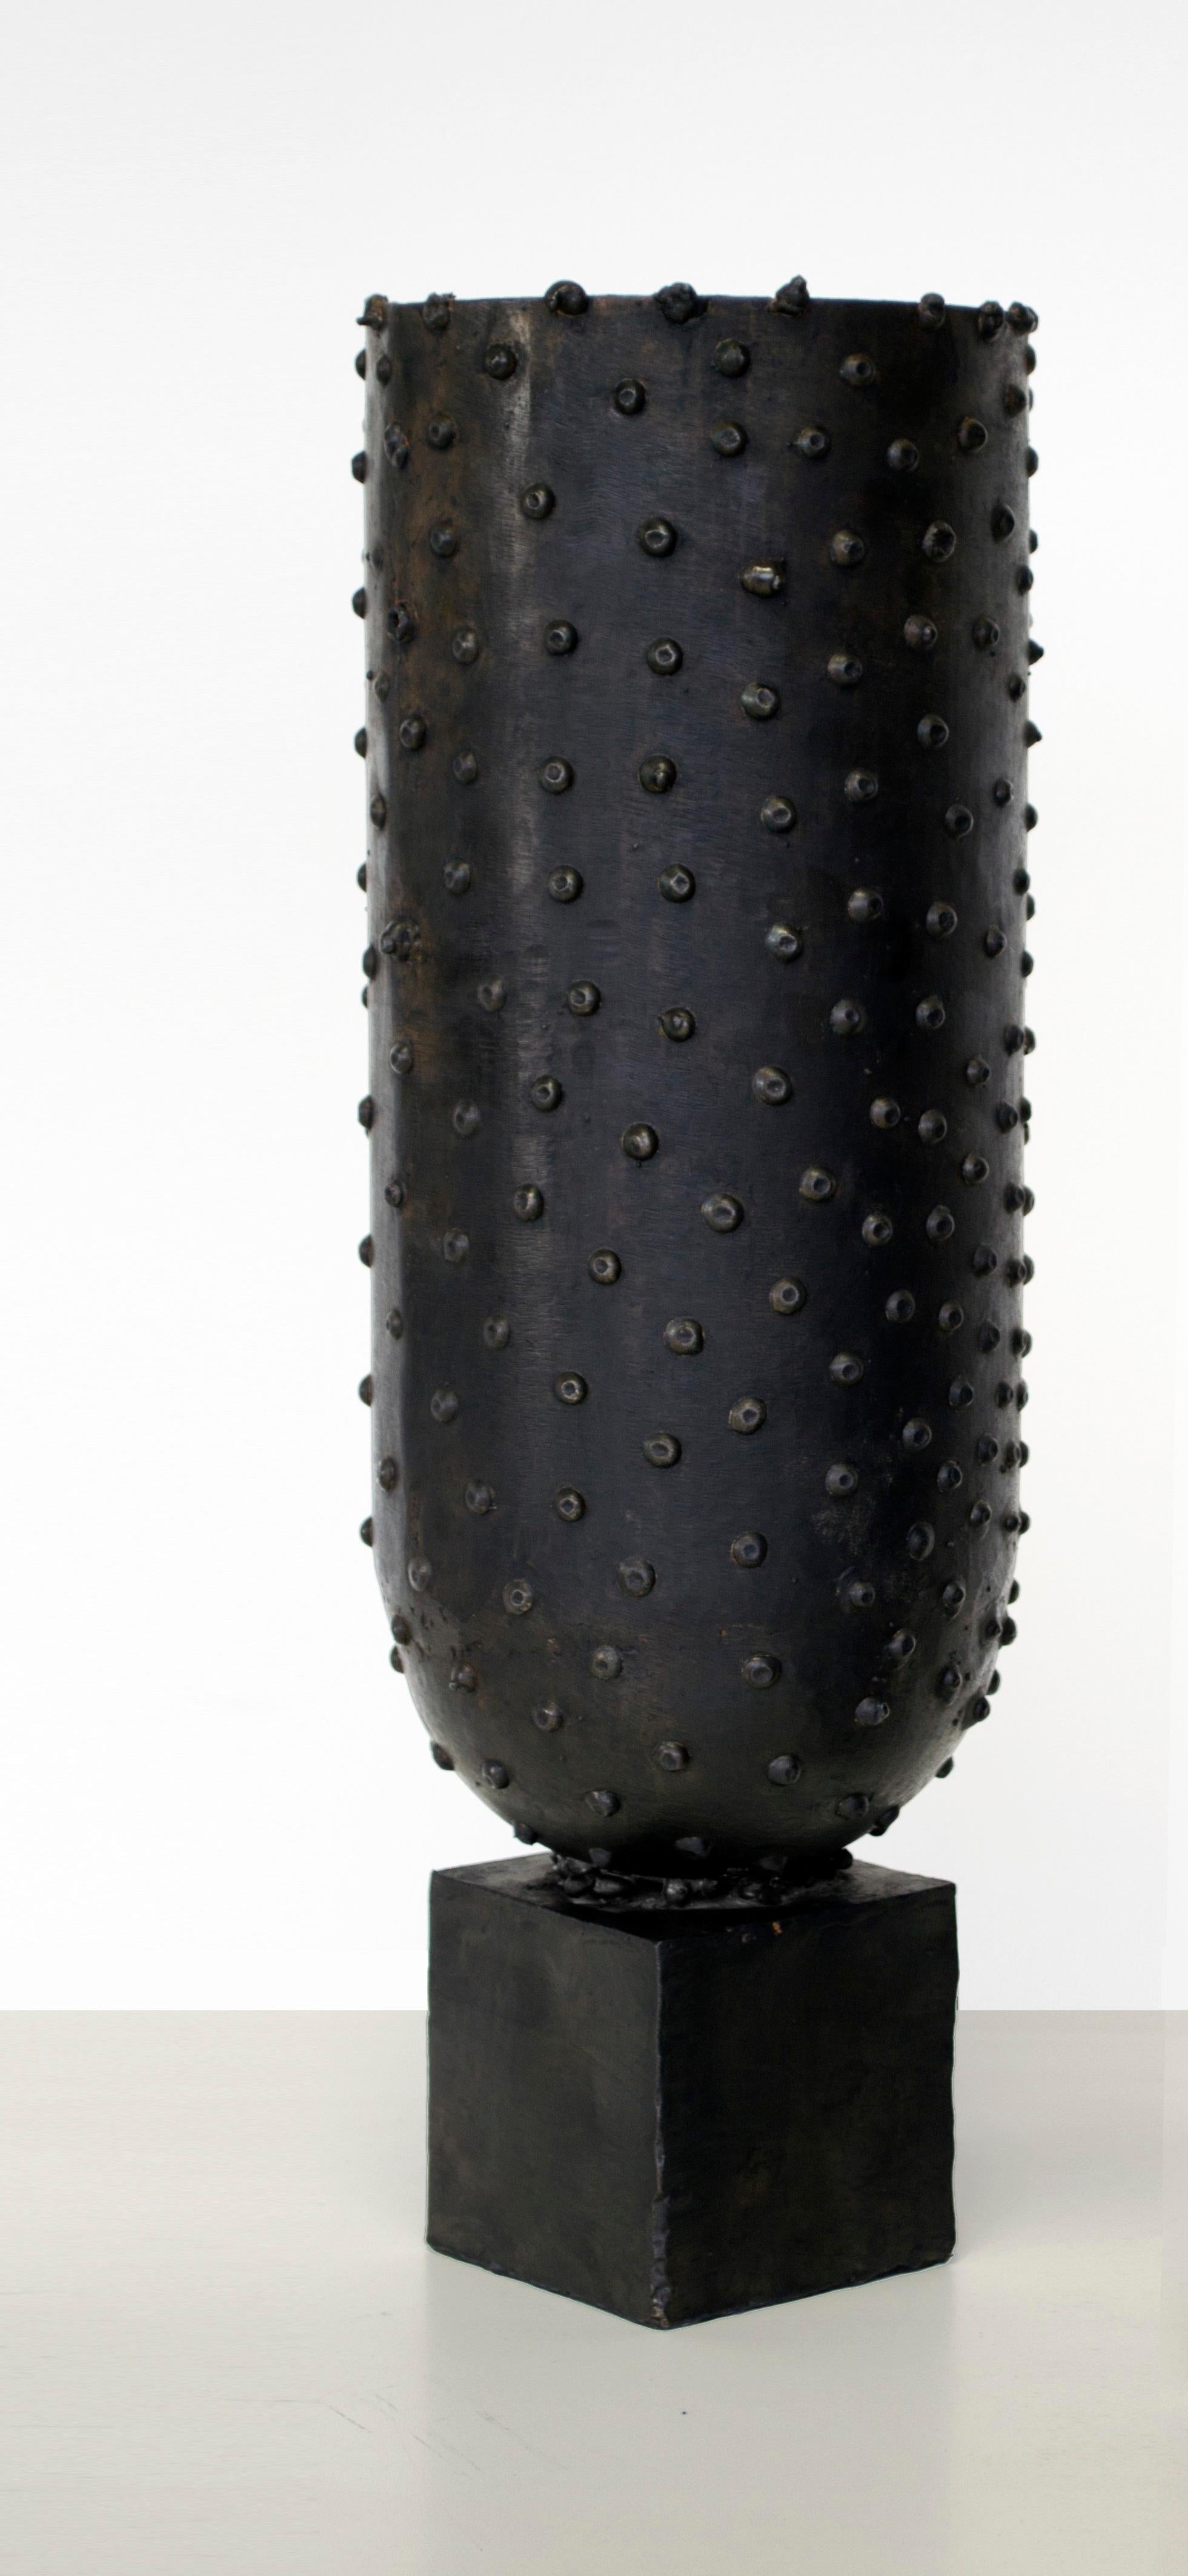 Forged Vessel Dotted Handcarved Vase Bumps Rough Textured Blackened Steel Waxed 